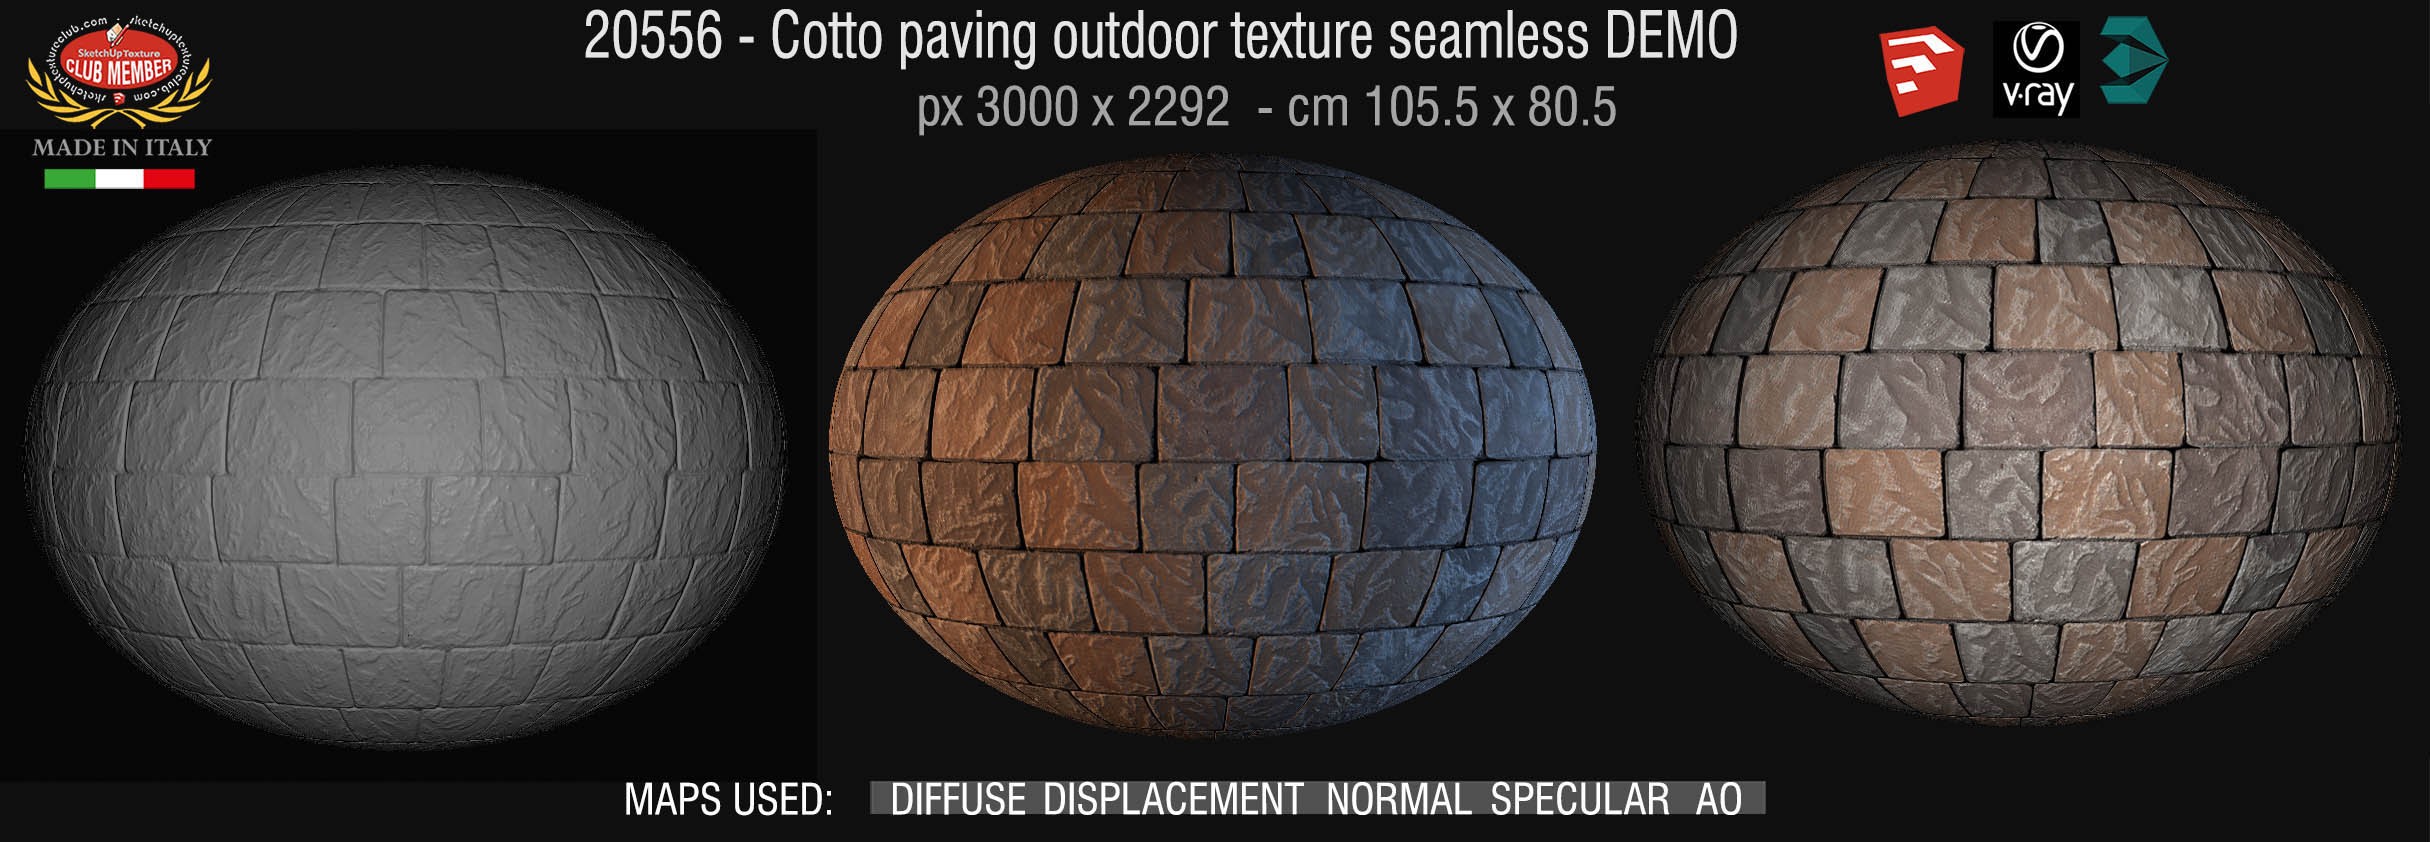 20556 - Cotto paving outdoor textureseamless + maps  DEMO